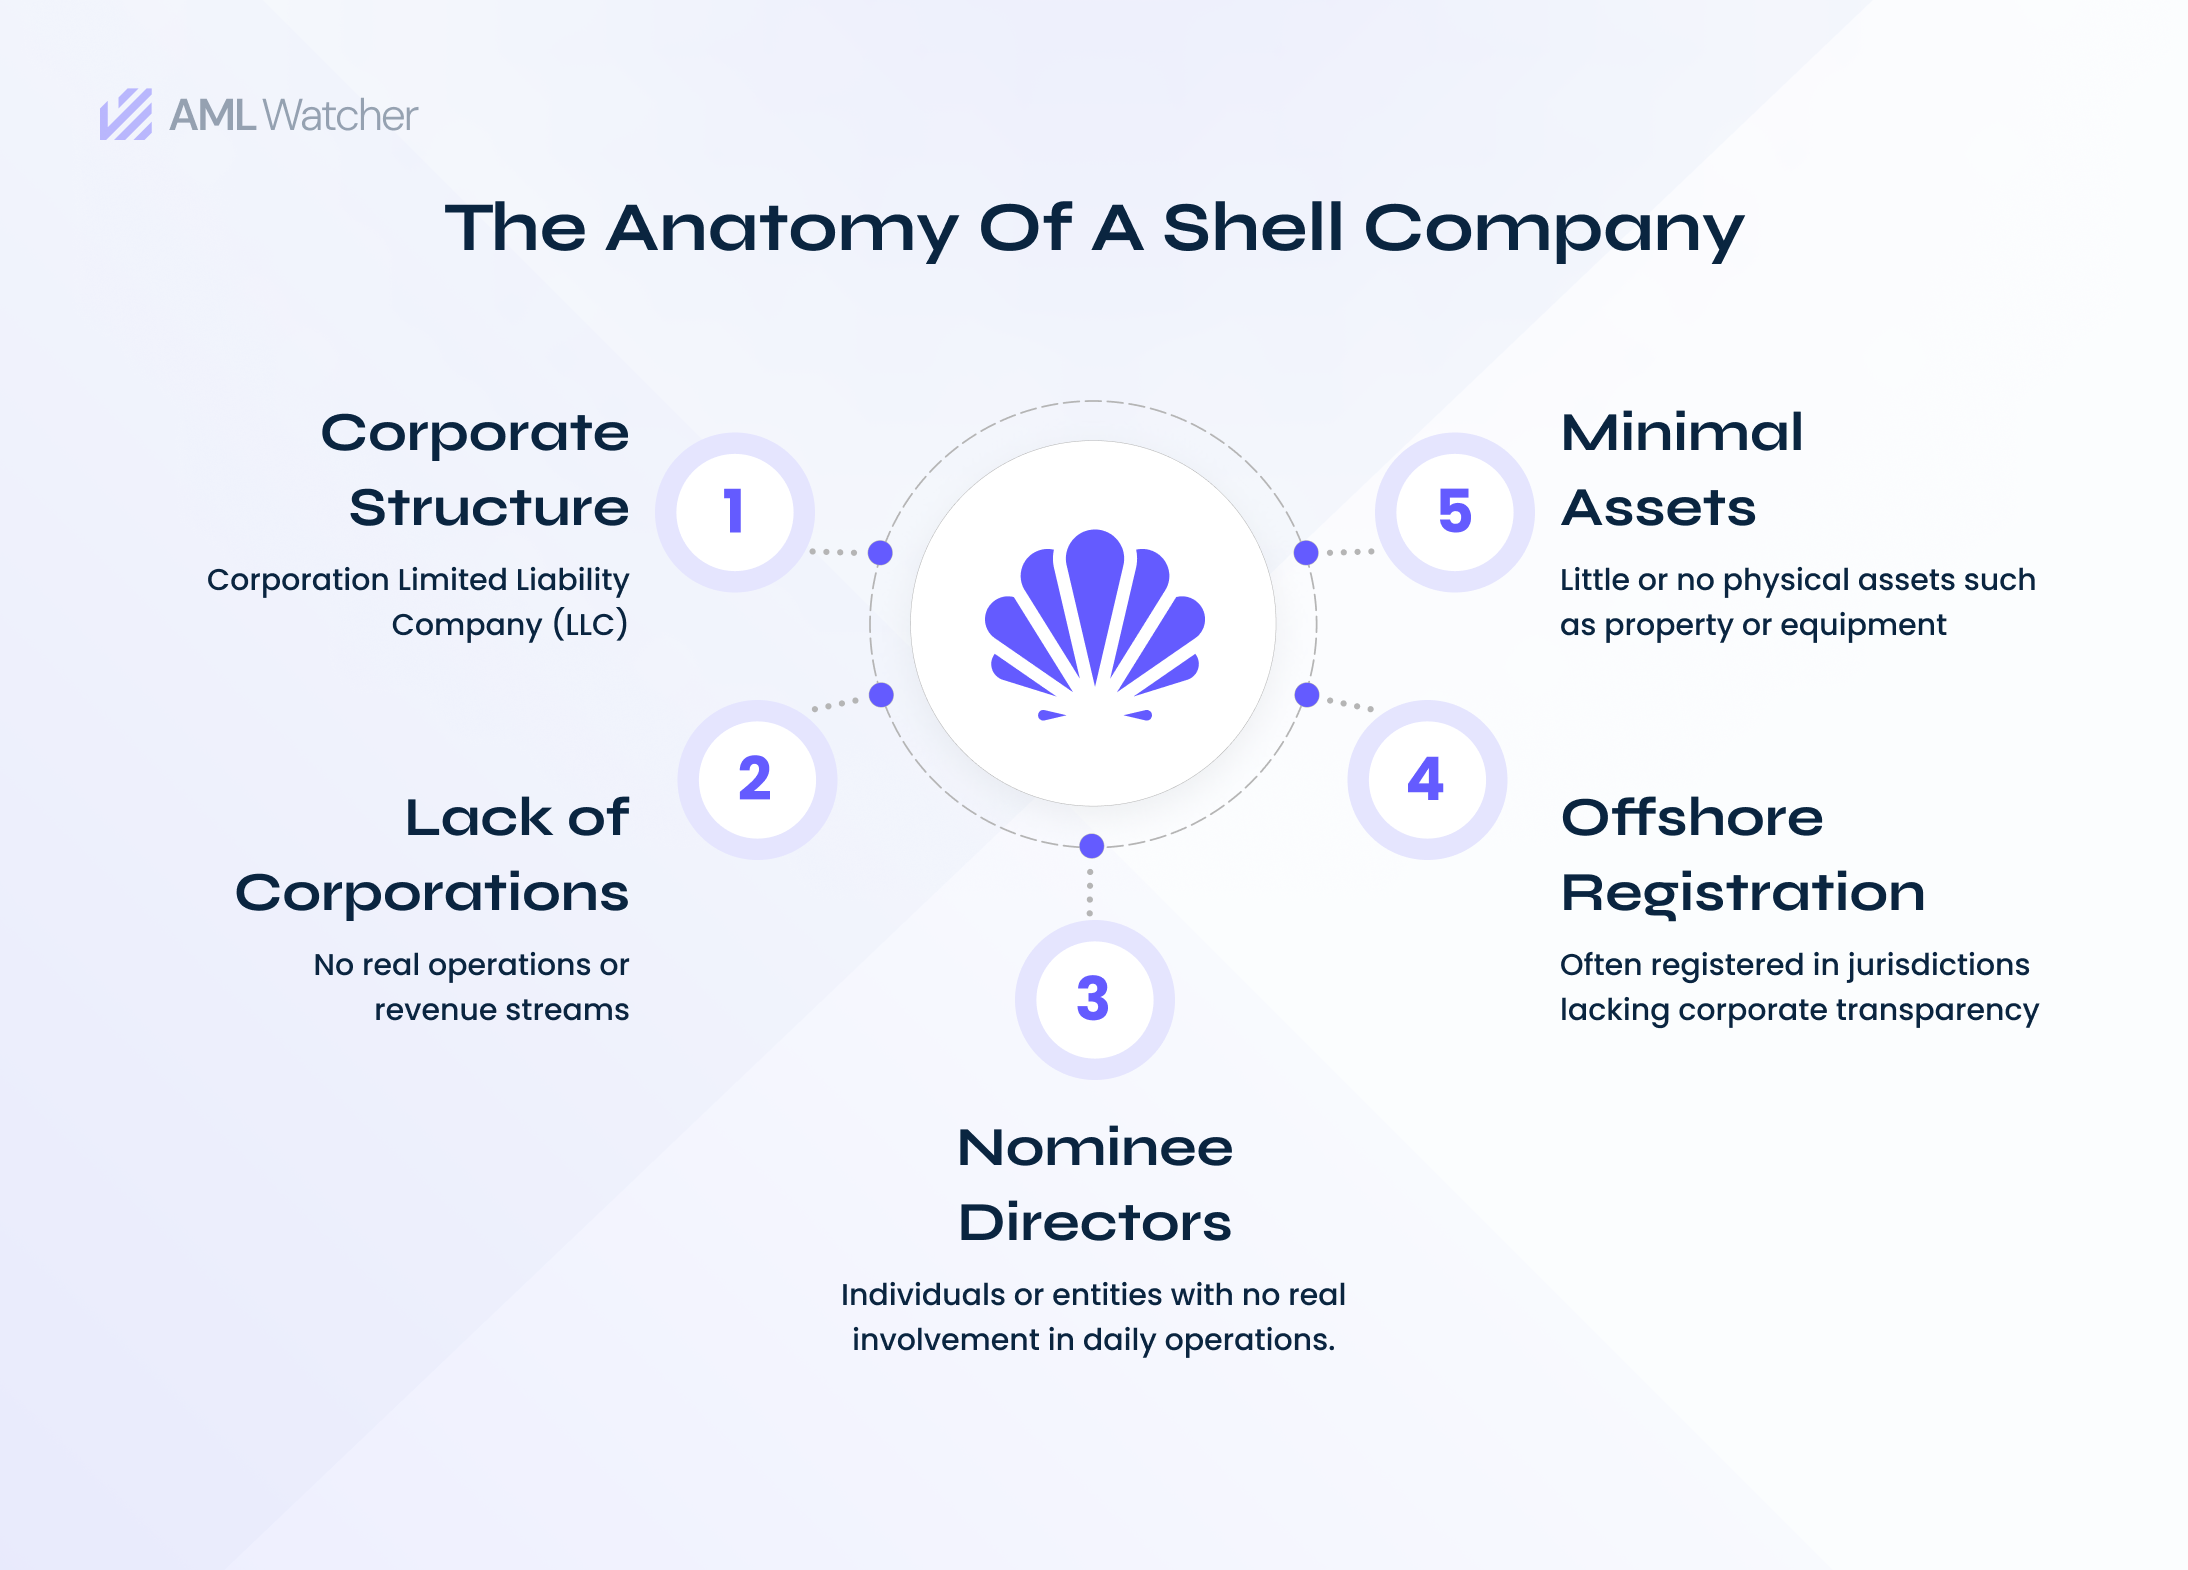 The featured image depicts the distinct features and anatomy of how the shell company operates.